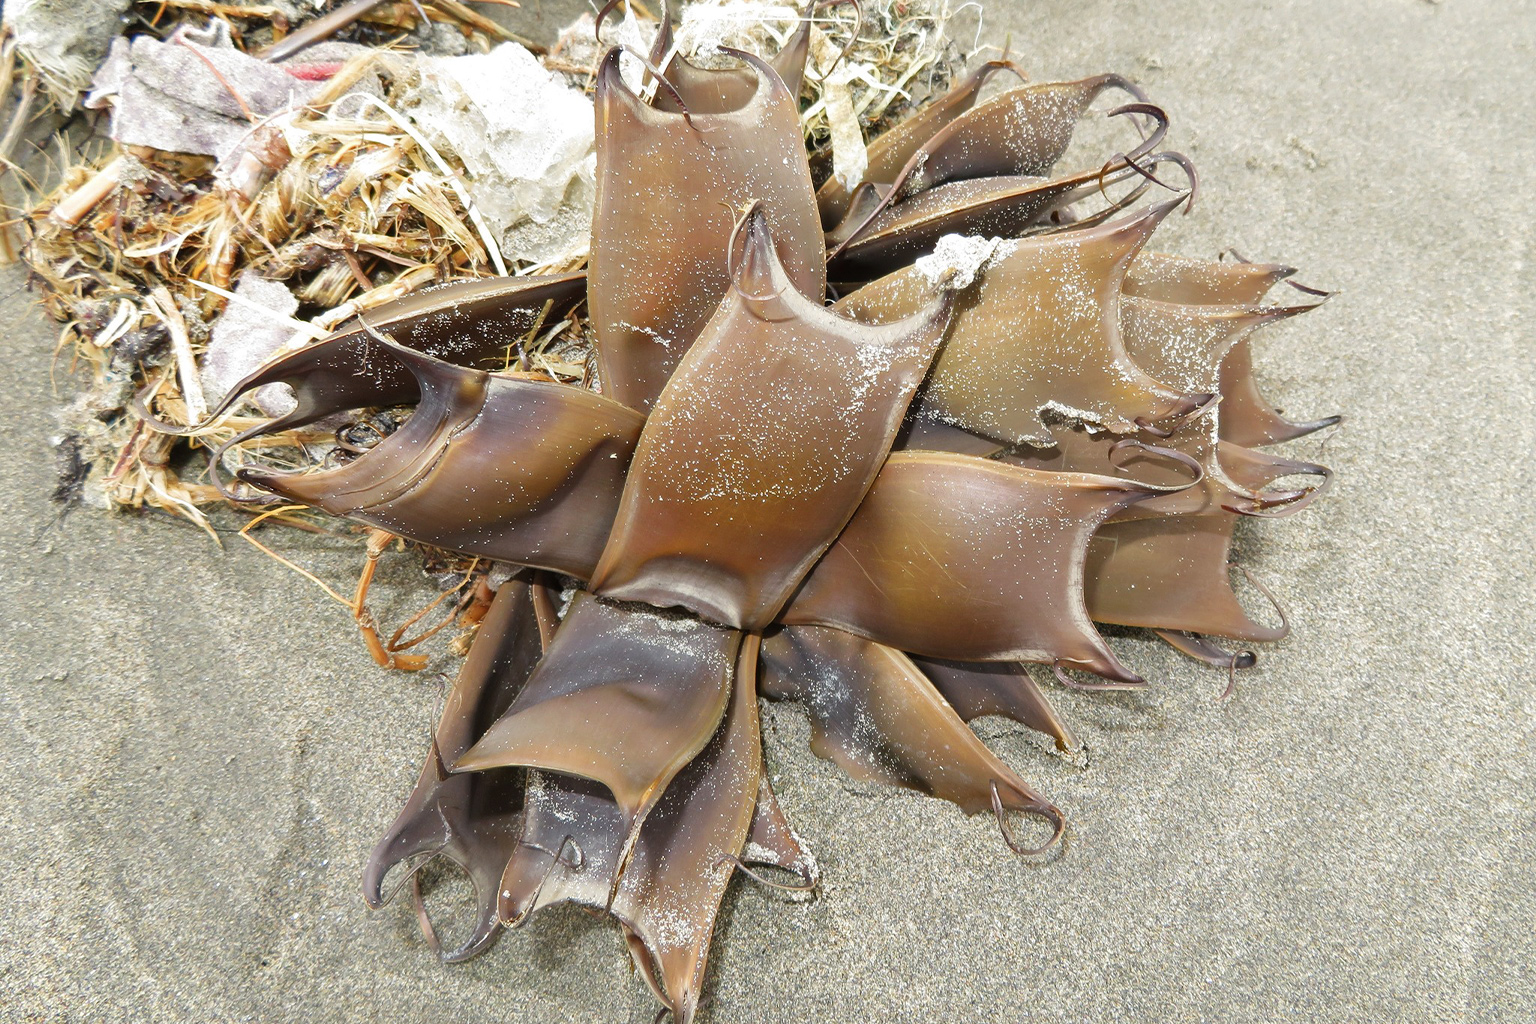 Washed-up egg cases of a ray.